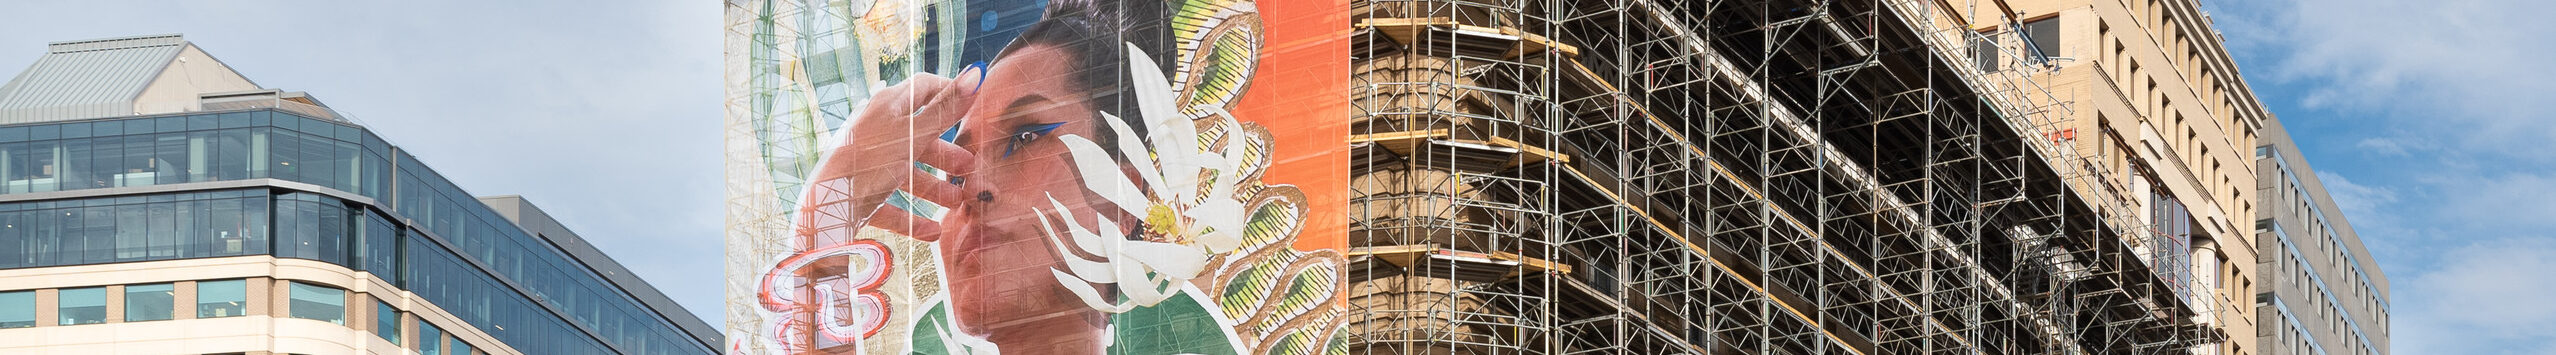 A colorful mural of a woman with flora on scaffolding on the museum building.